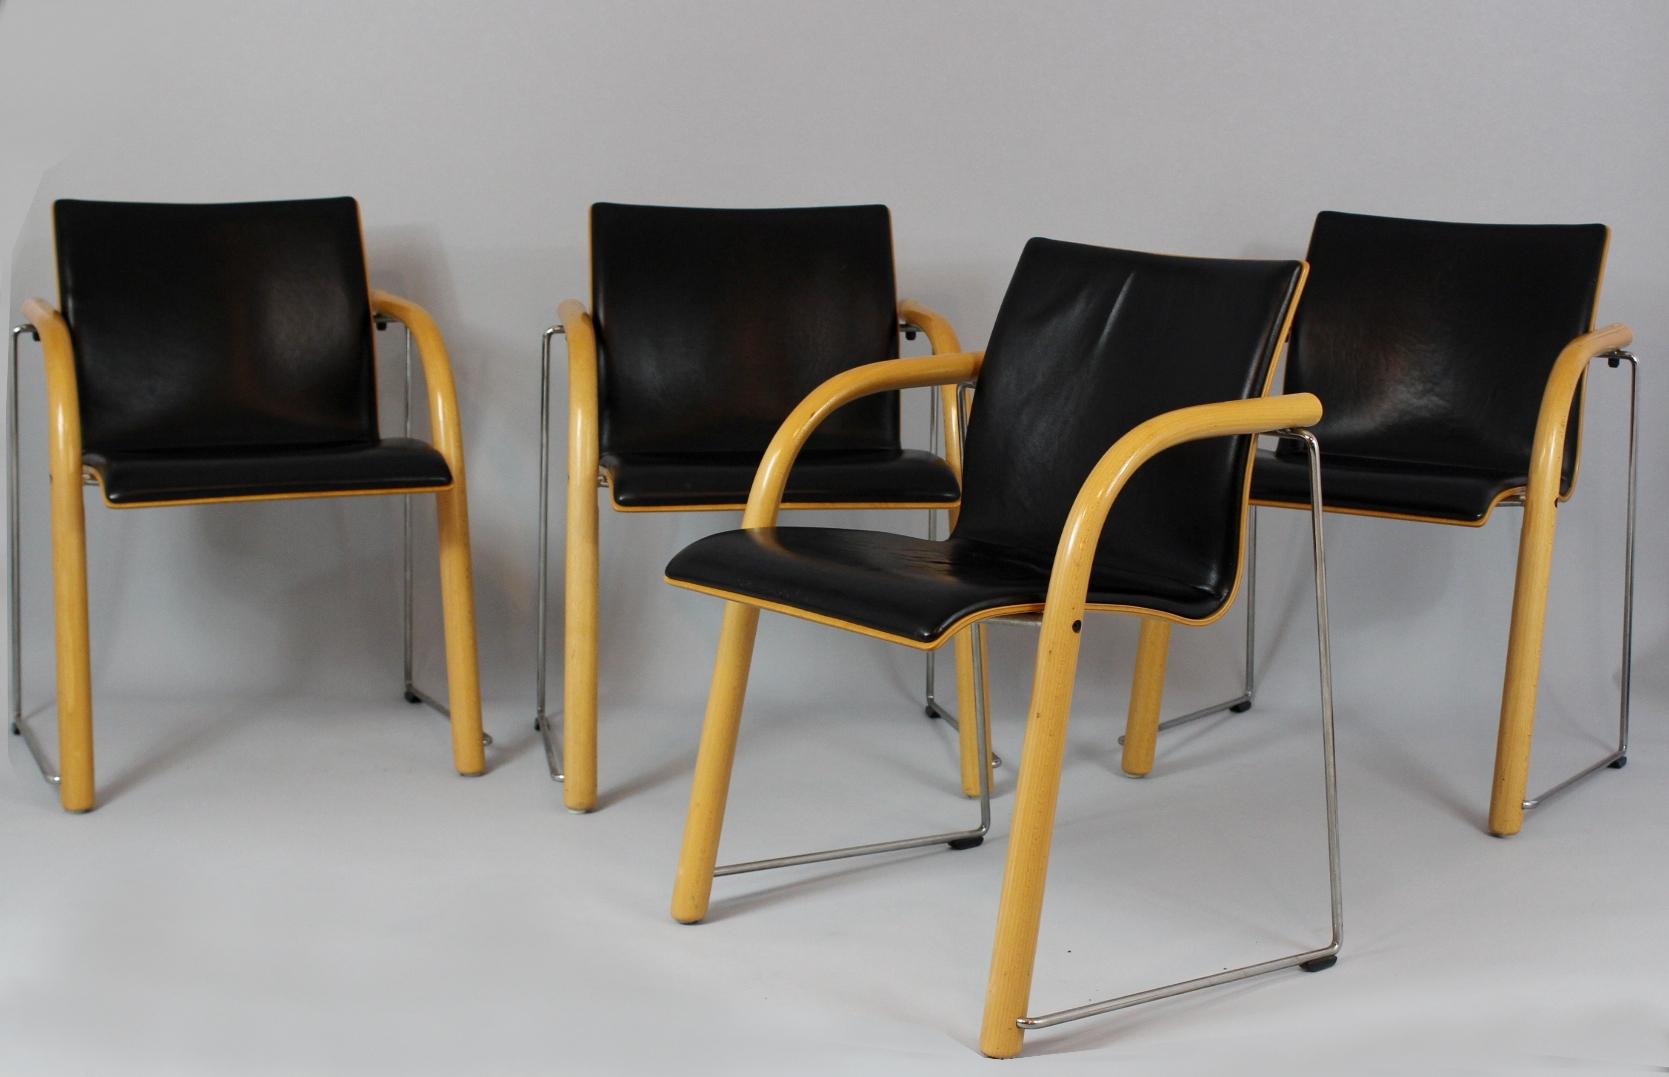 Set of four stocking chairs designed by Wulf Schneider and Ulrich Böhme in 1984 for Thonet. Material is plywood, worn leather and steel.